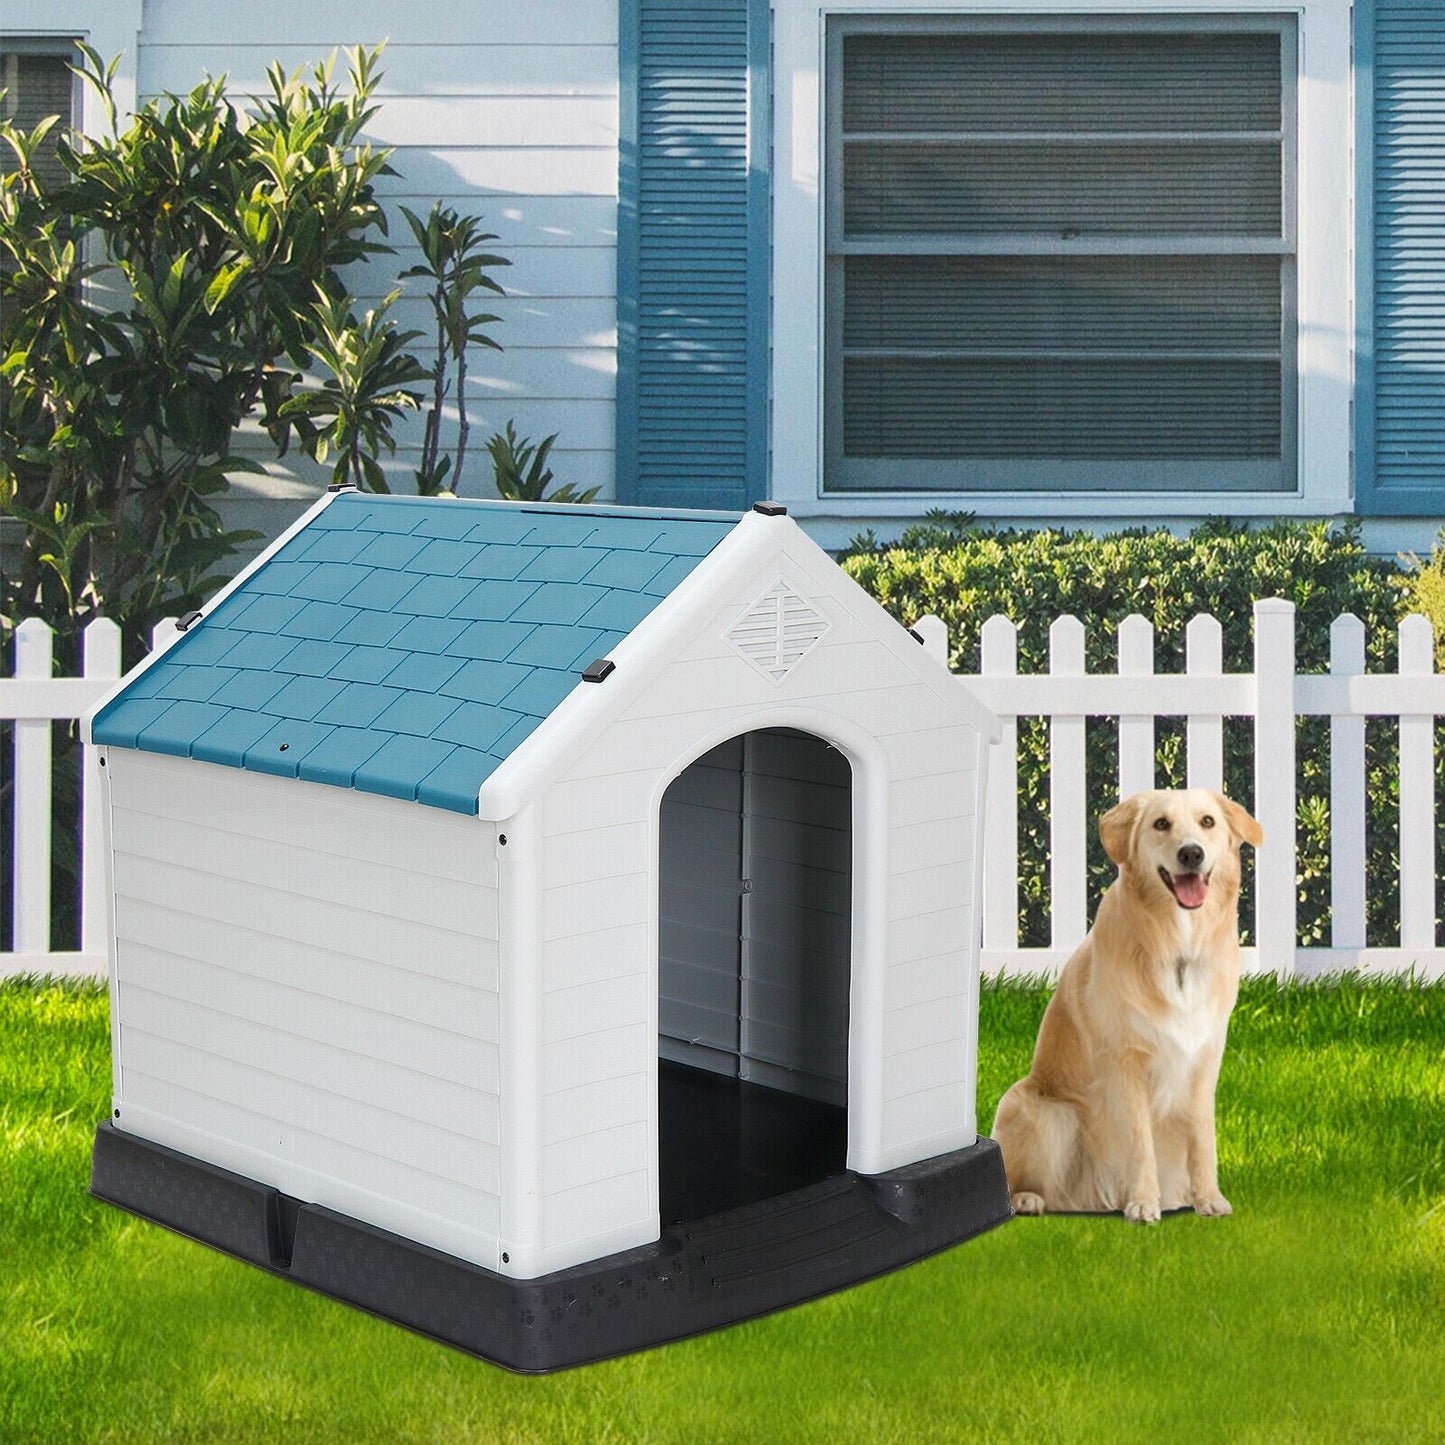 32" Plastic Outdoor Large Dog House Pet Puppy Kennel Weather & Water Resistant